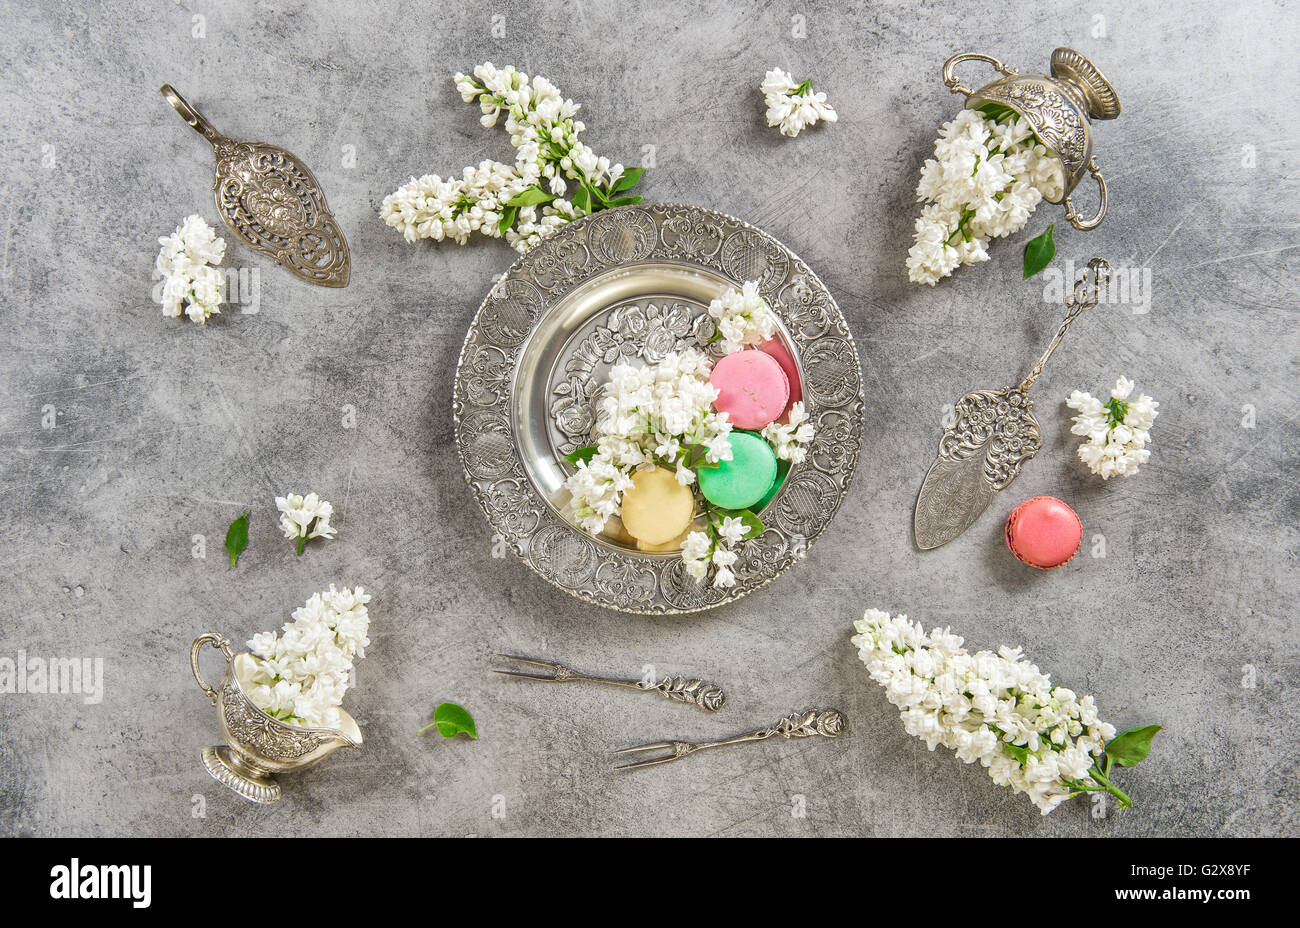 Macaroons. Creative food background. Vintage style flat lay with white lilac flowers Stock Photo